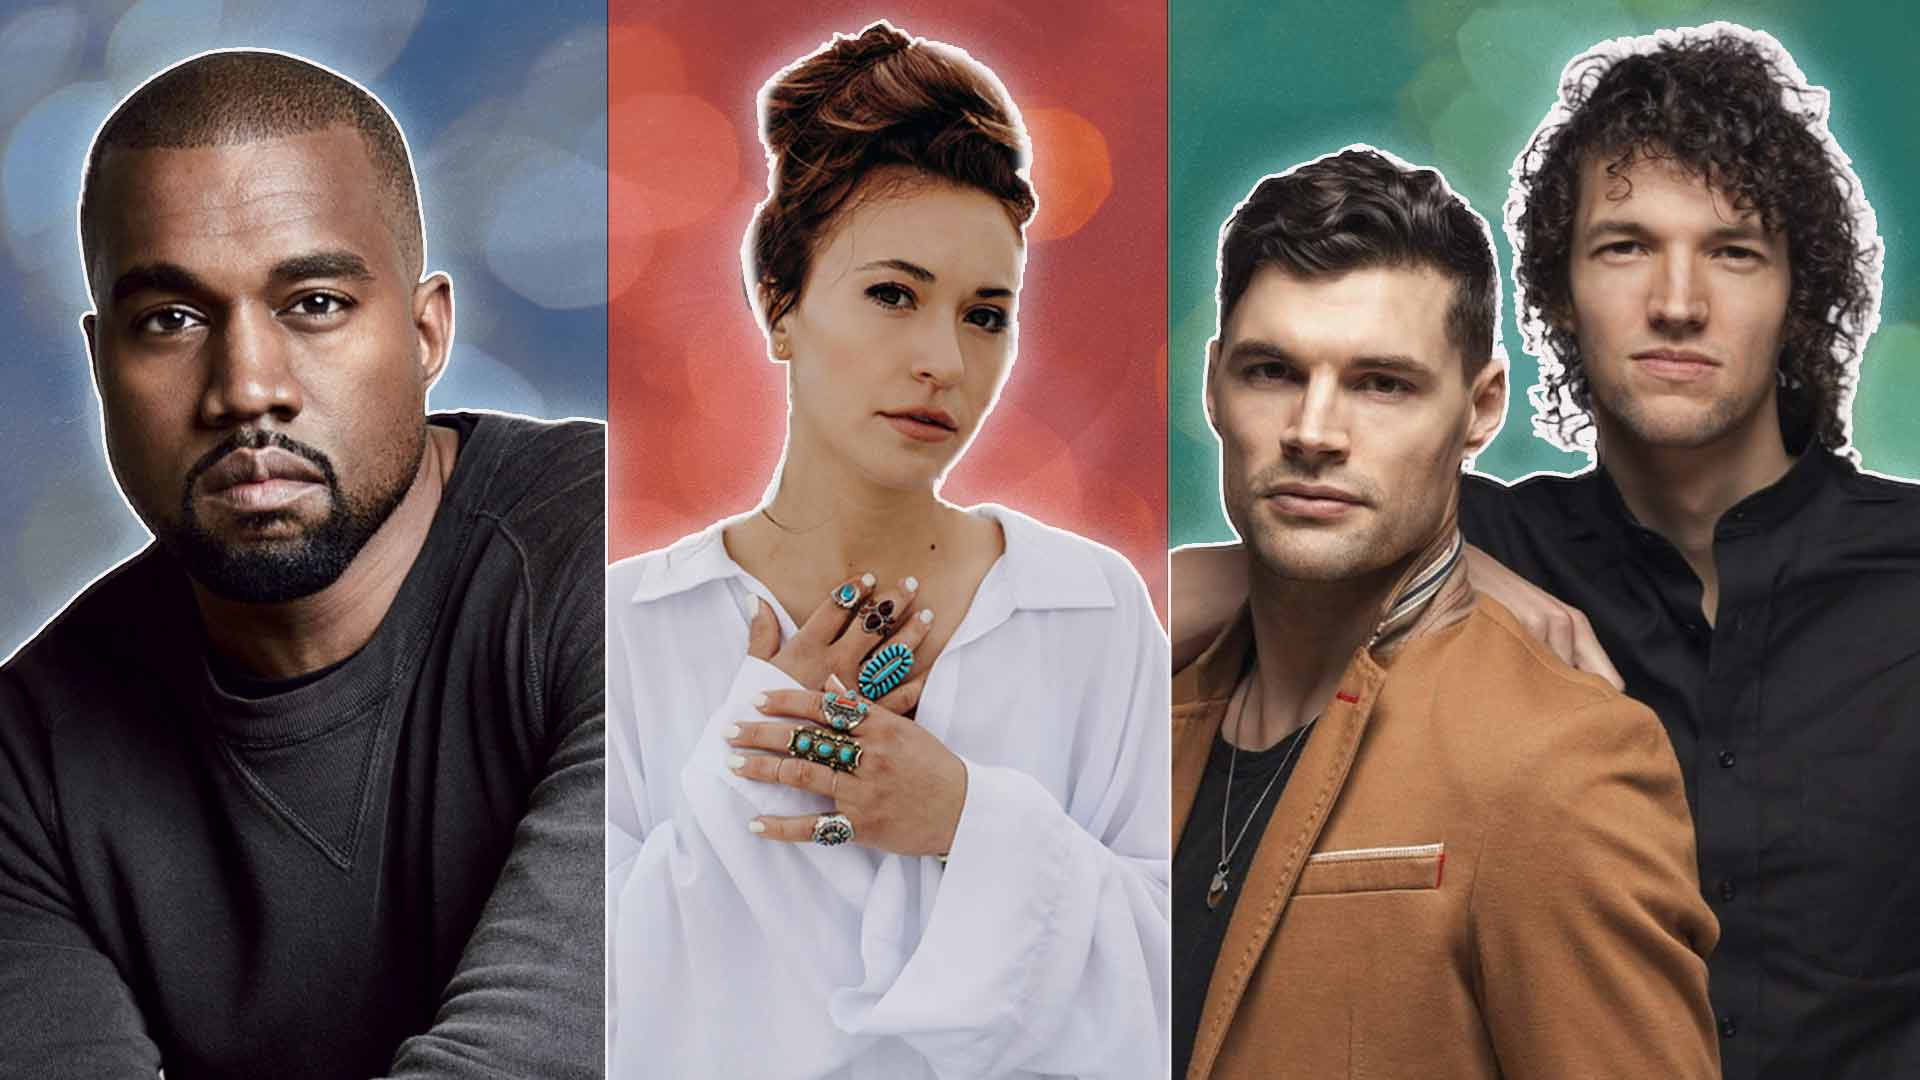 Kanye West, Lauren Daigle, & Joel and Luke Smallbone of For King and Country cutout on a multicolored background